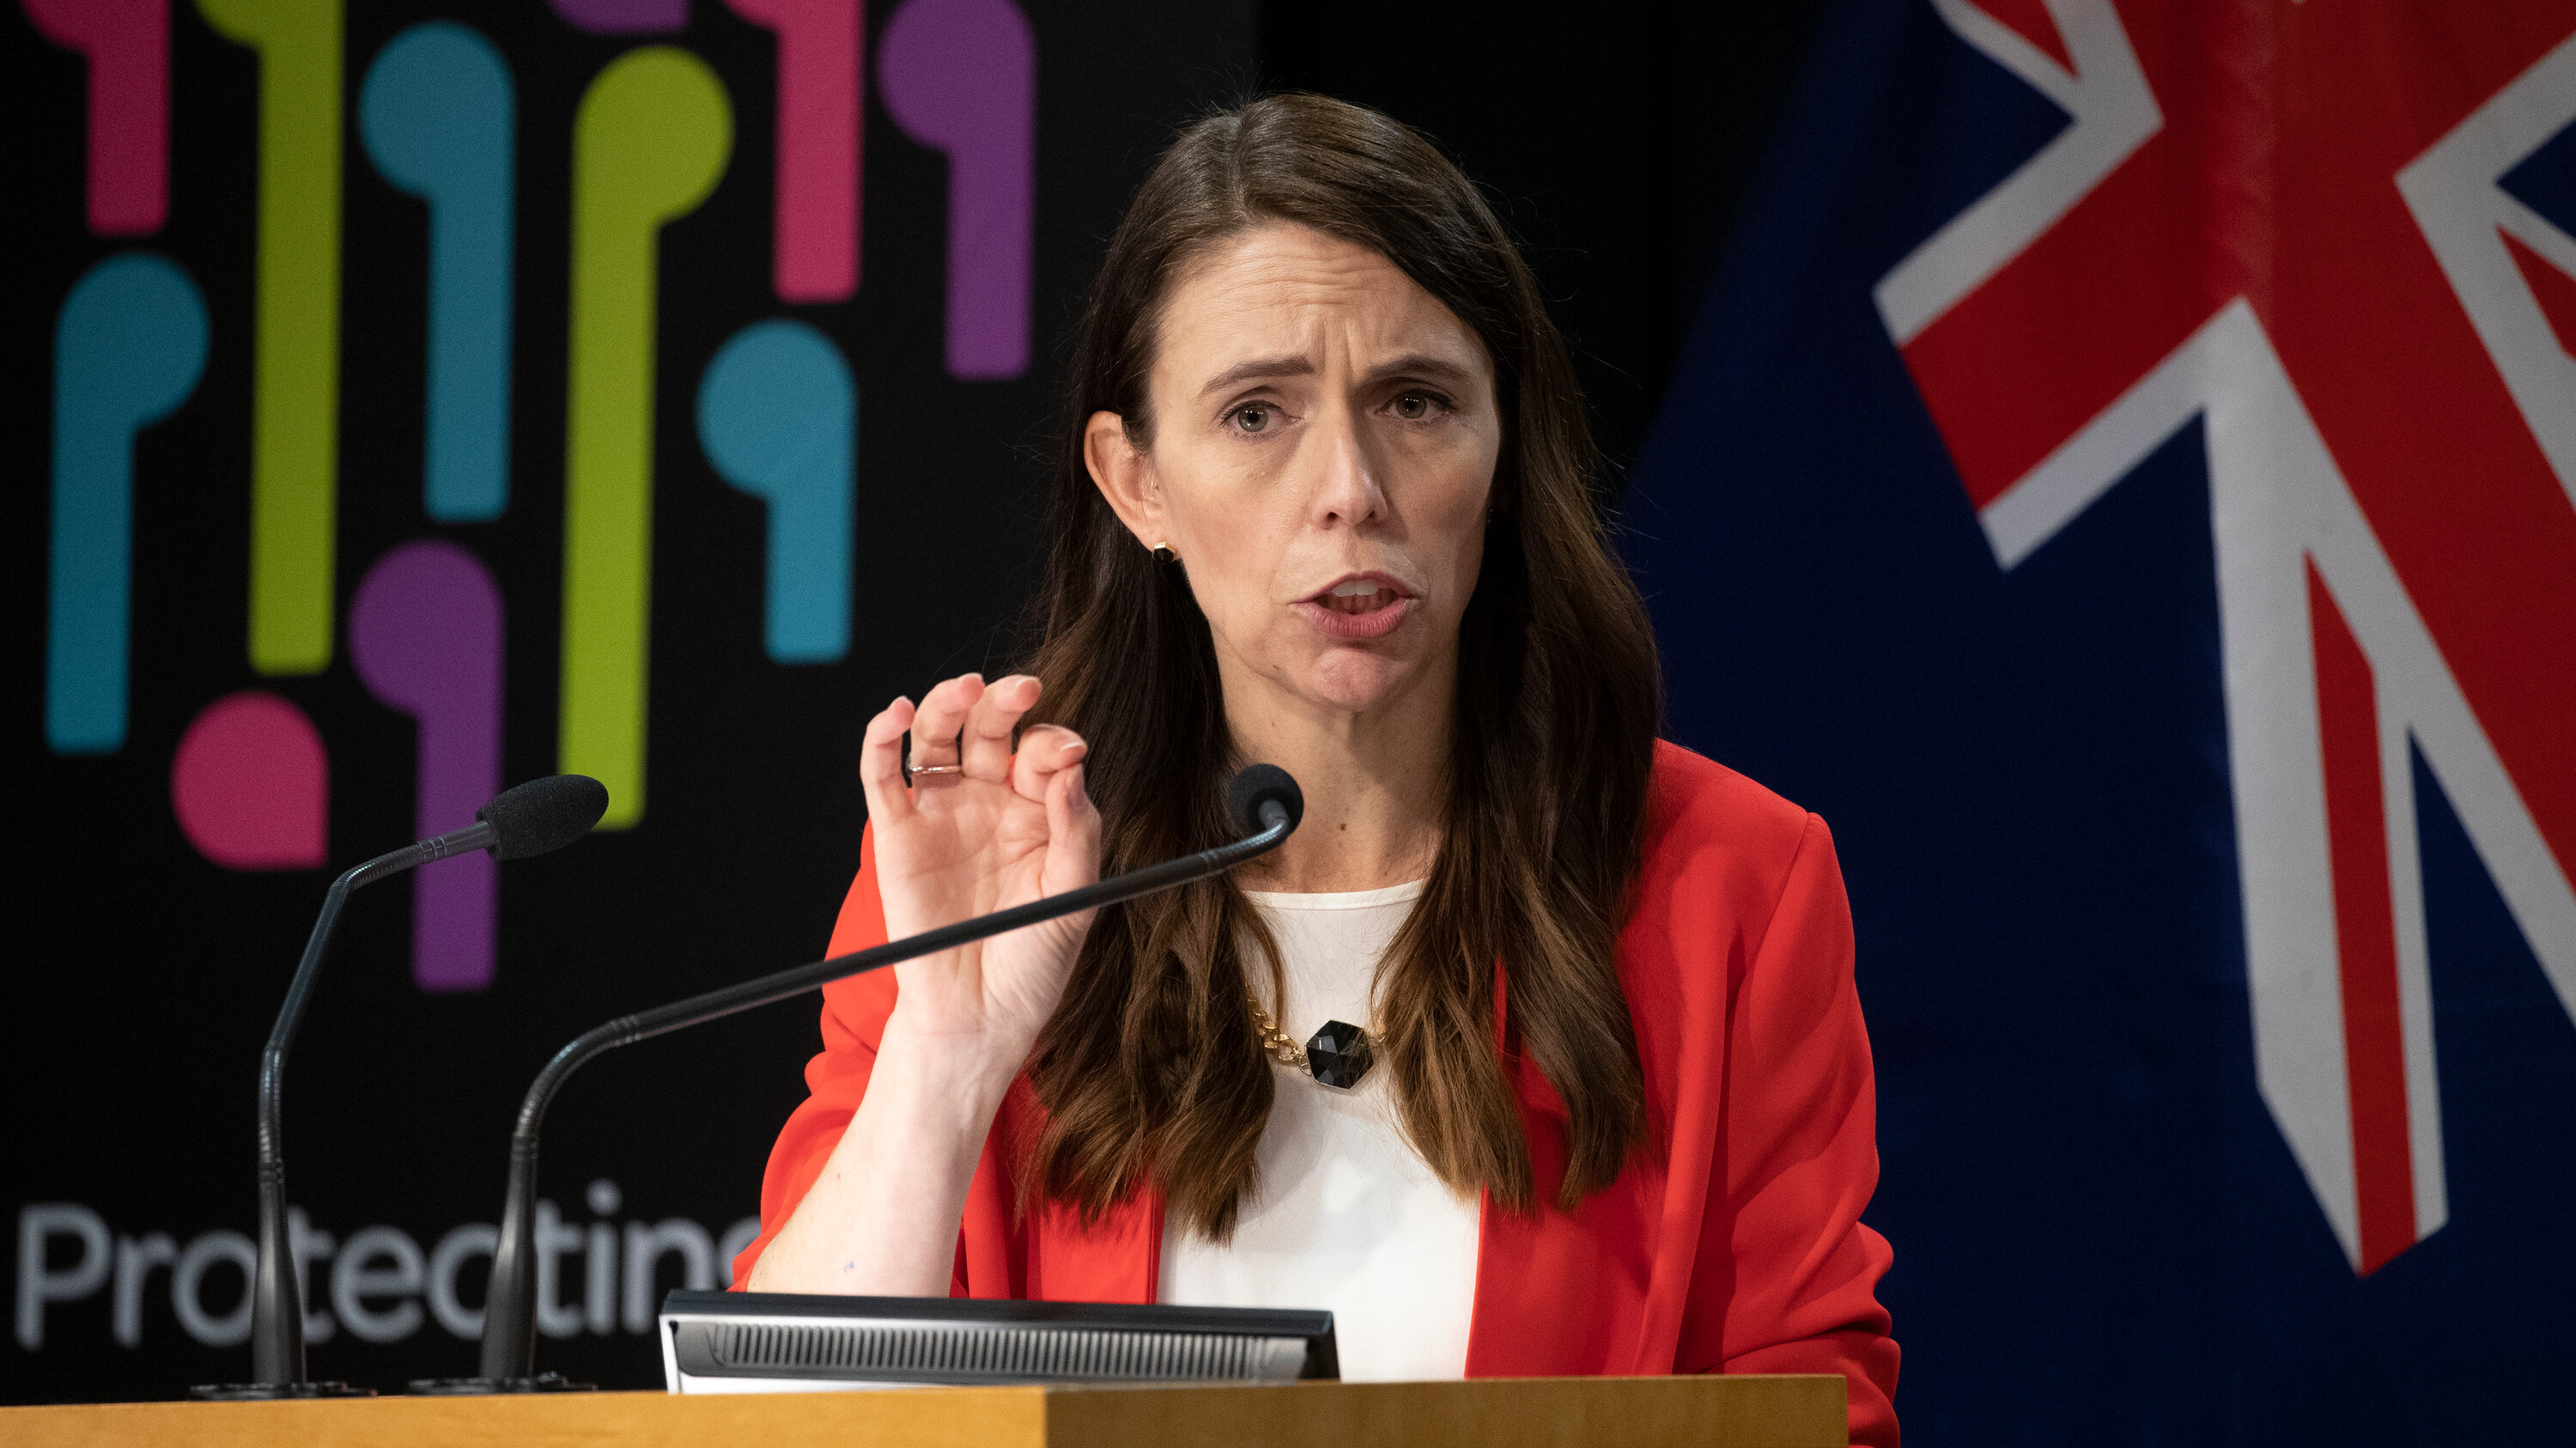 New Zealand Prime Minister Jacinda Ardern has called for de-escalation in the Indo-Pacific after the US and China exchanged threats over Taiwan.